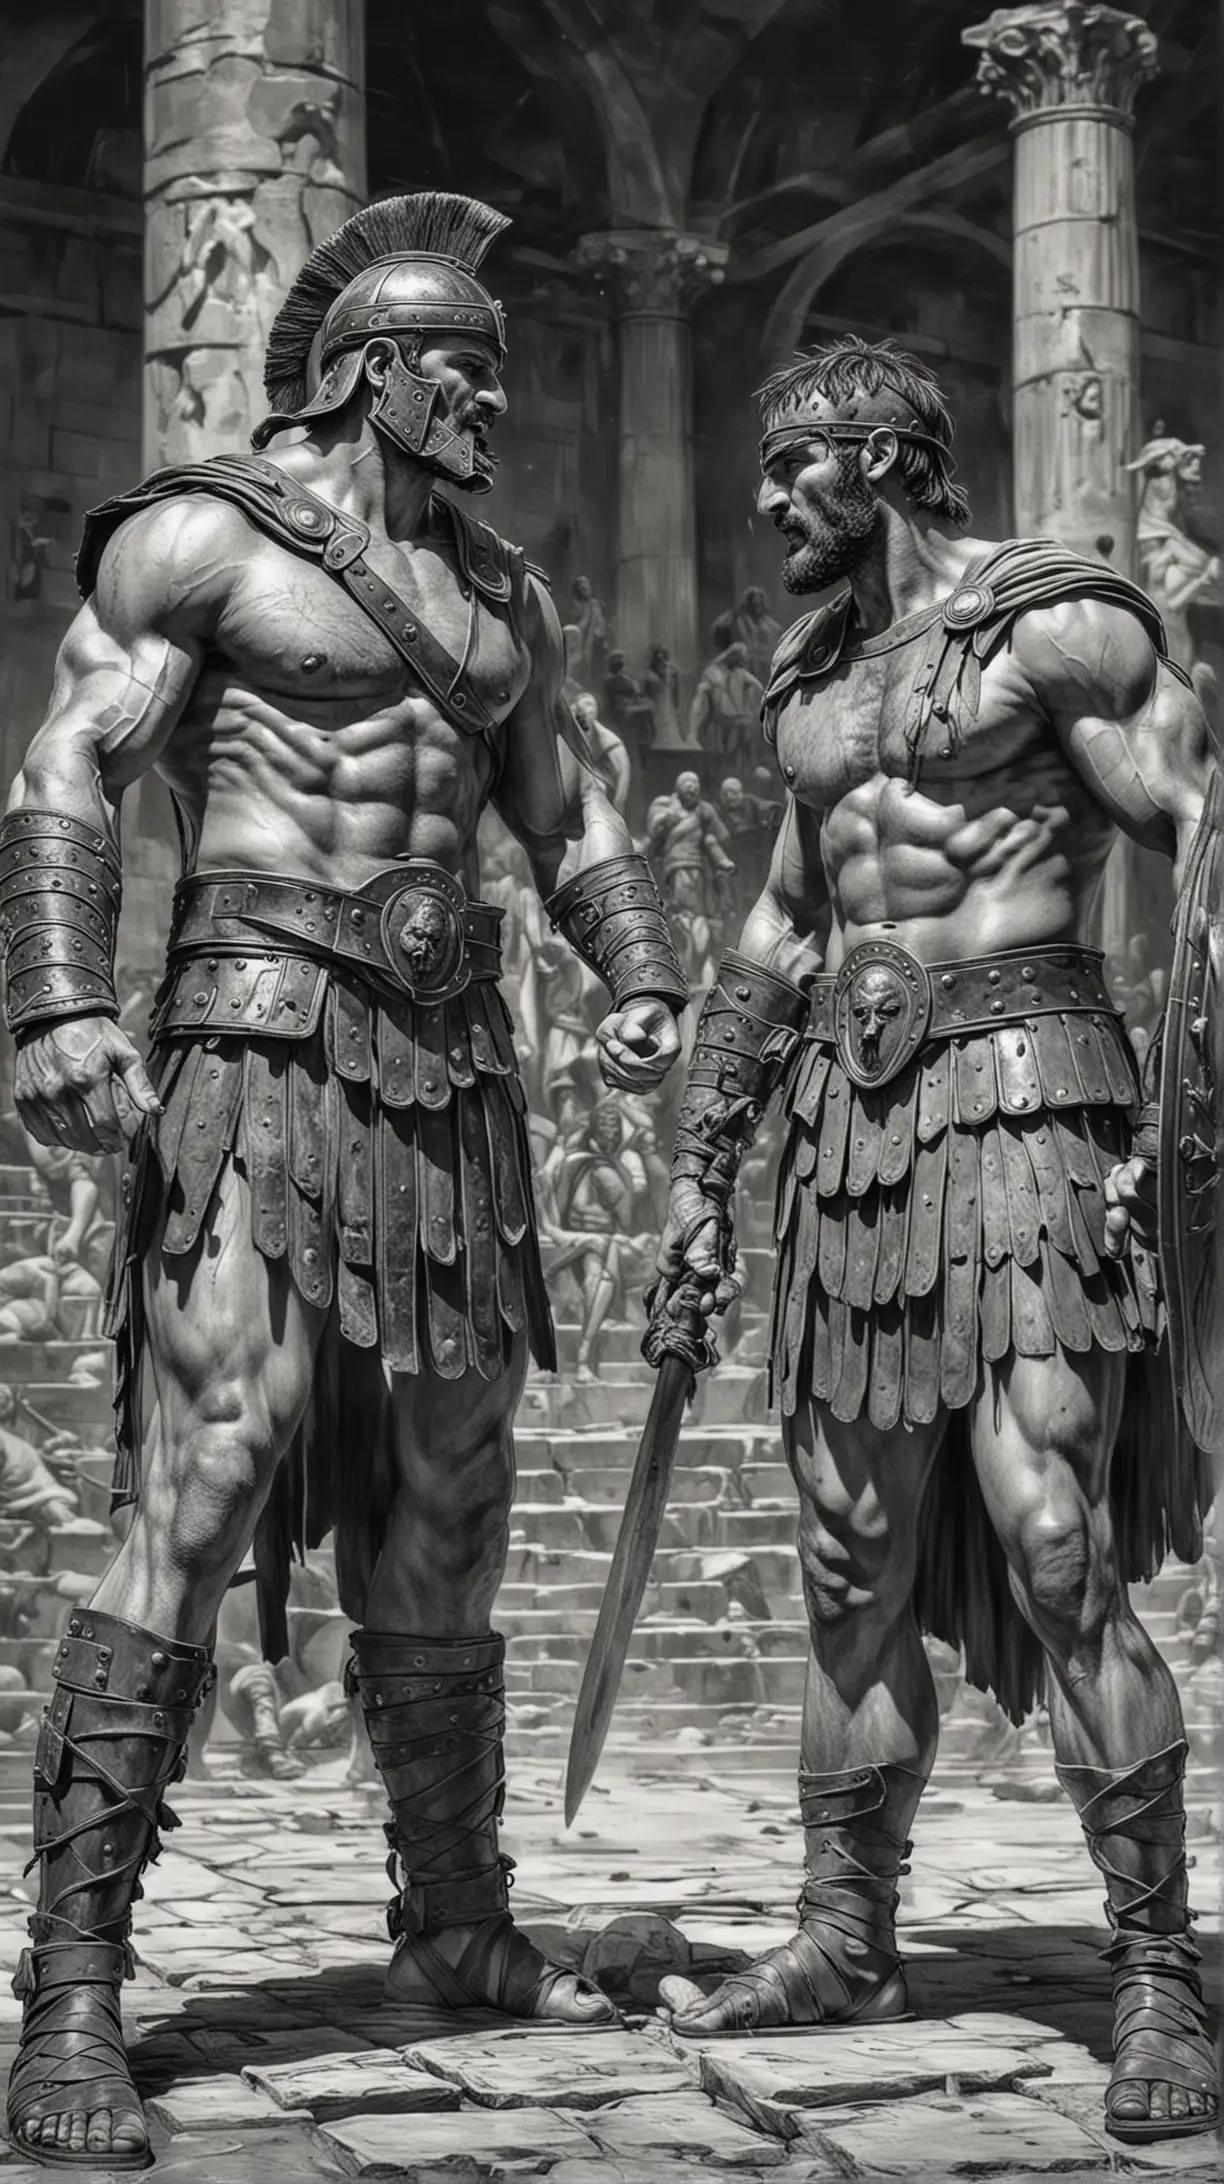 An ancient Roman gladiator and a huge barbarian in the Colosseum arena, storyboard sketch black and white detailed style